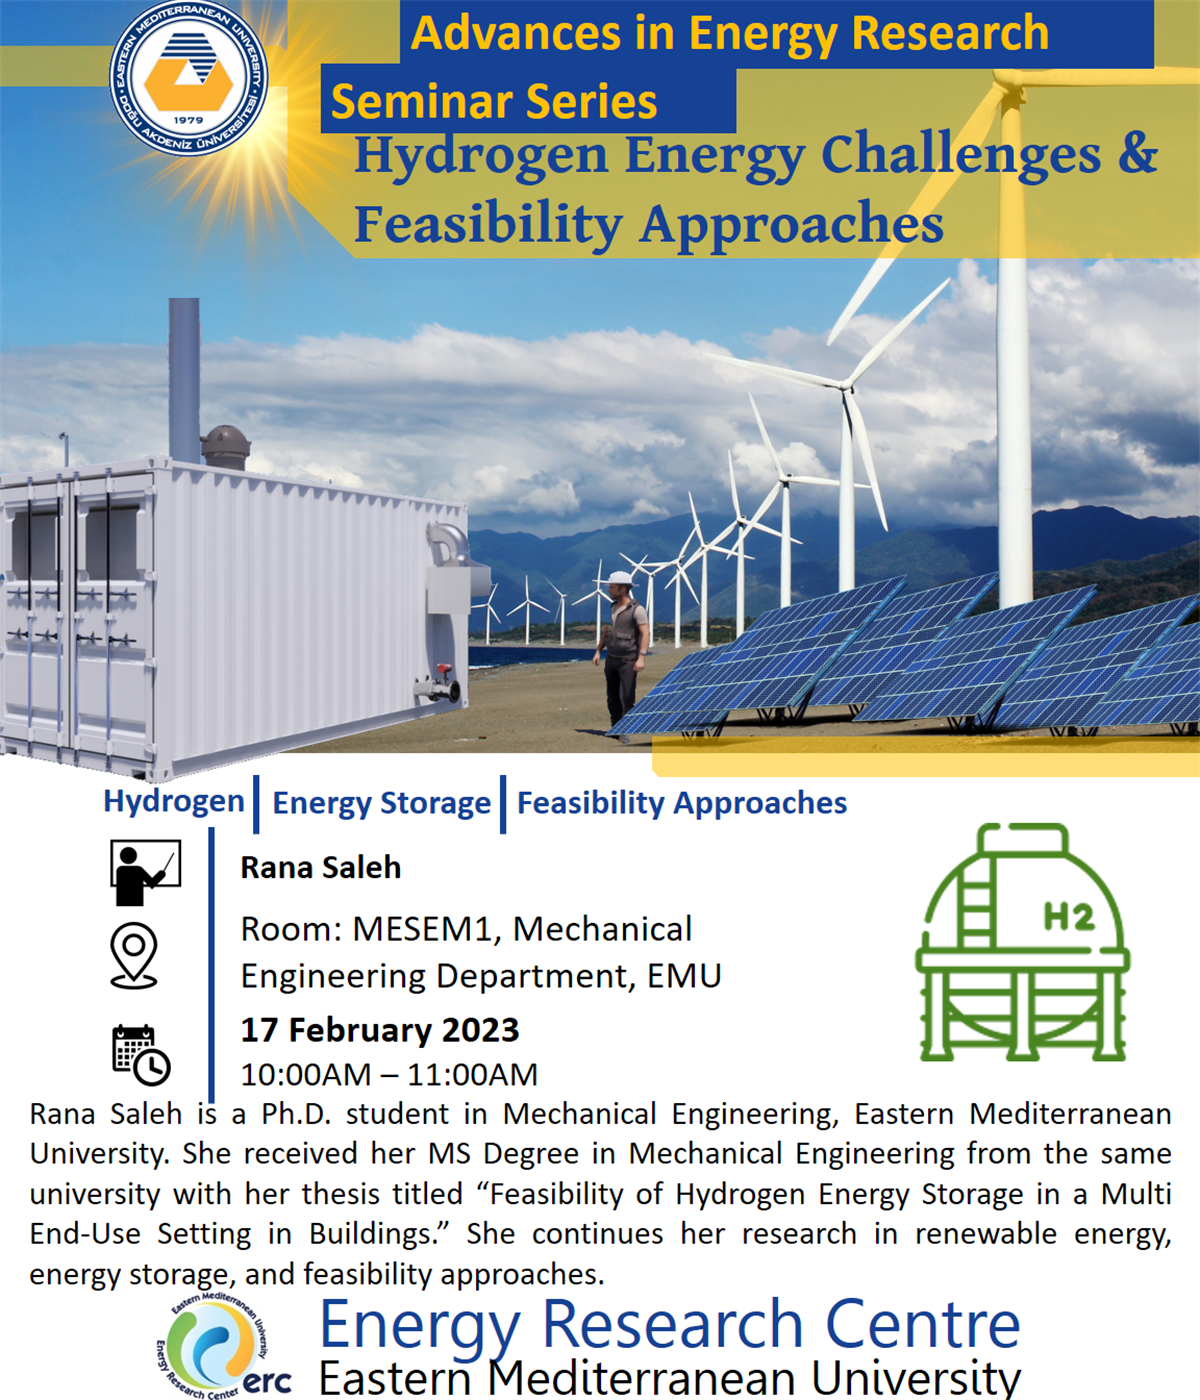 Advances in Energy Research Seminar Series "Hydrogen Energy Challenges & Feasibility Approches"